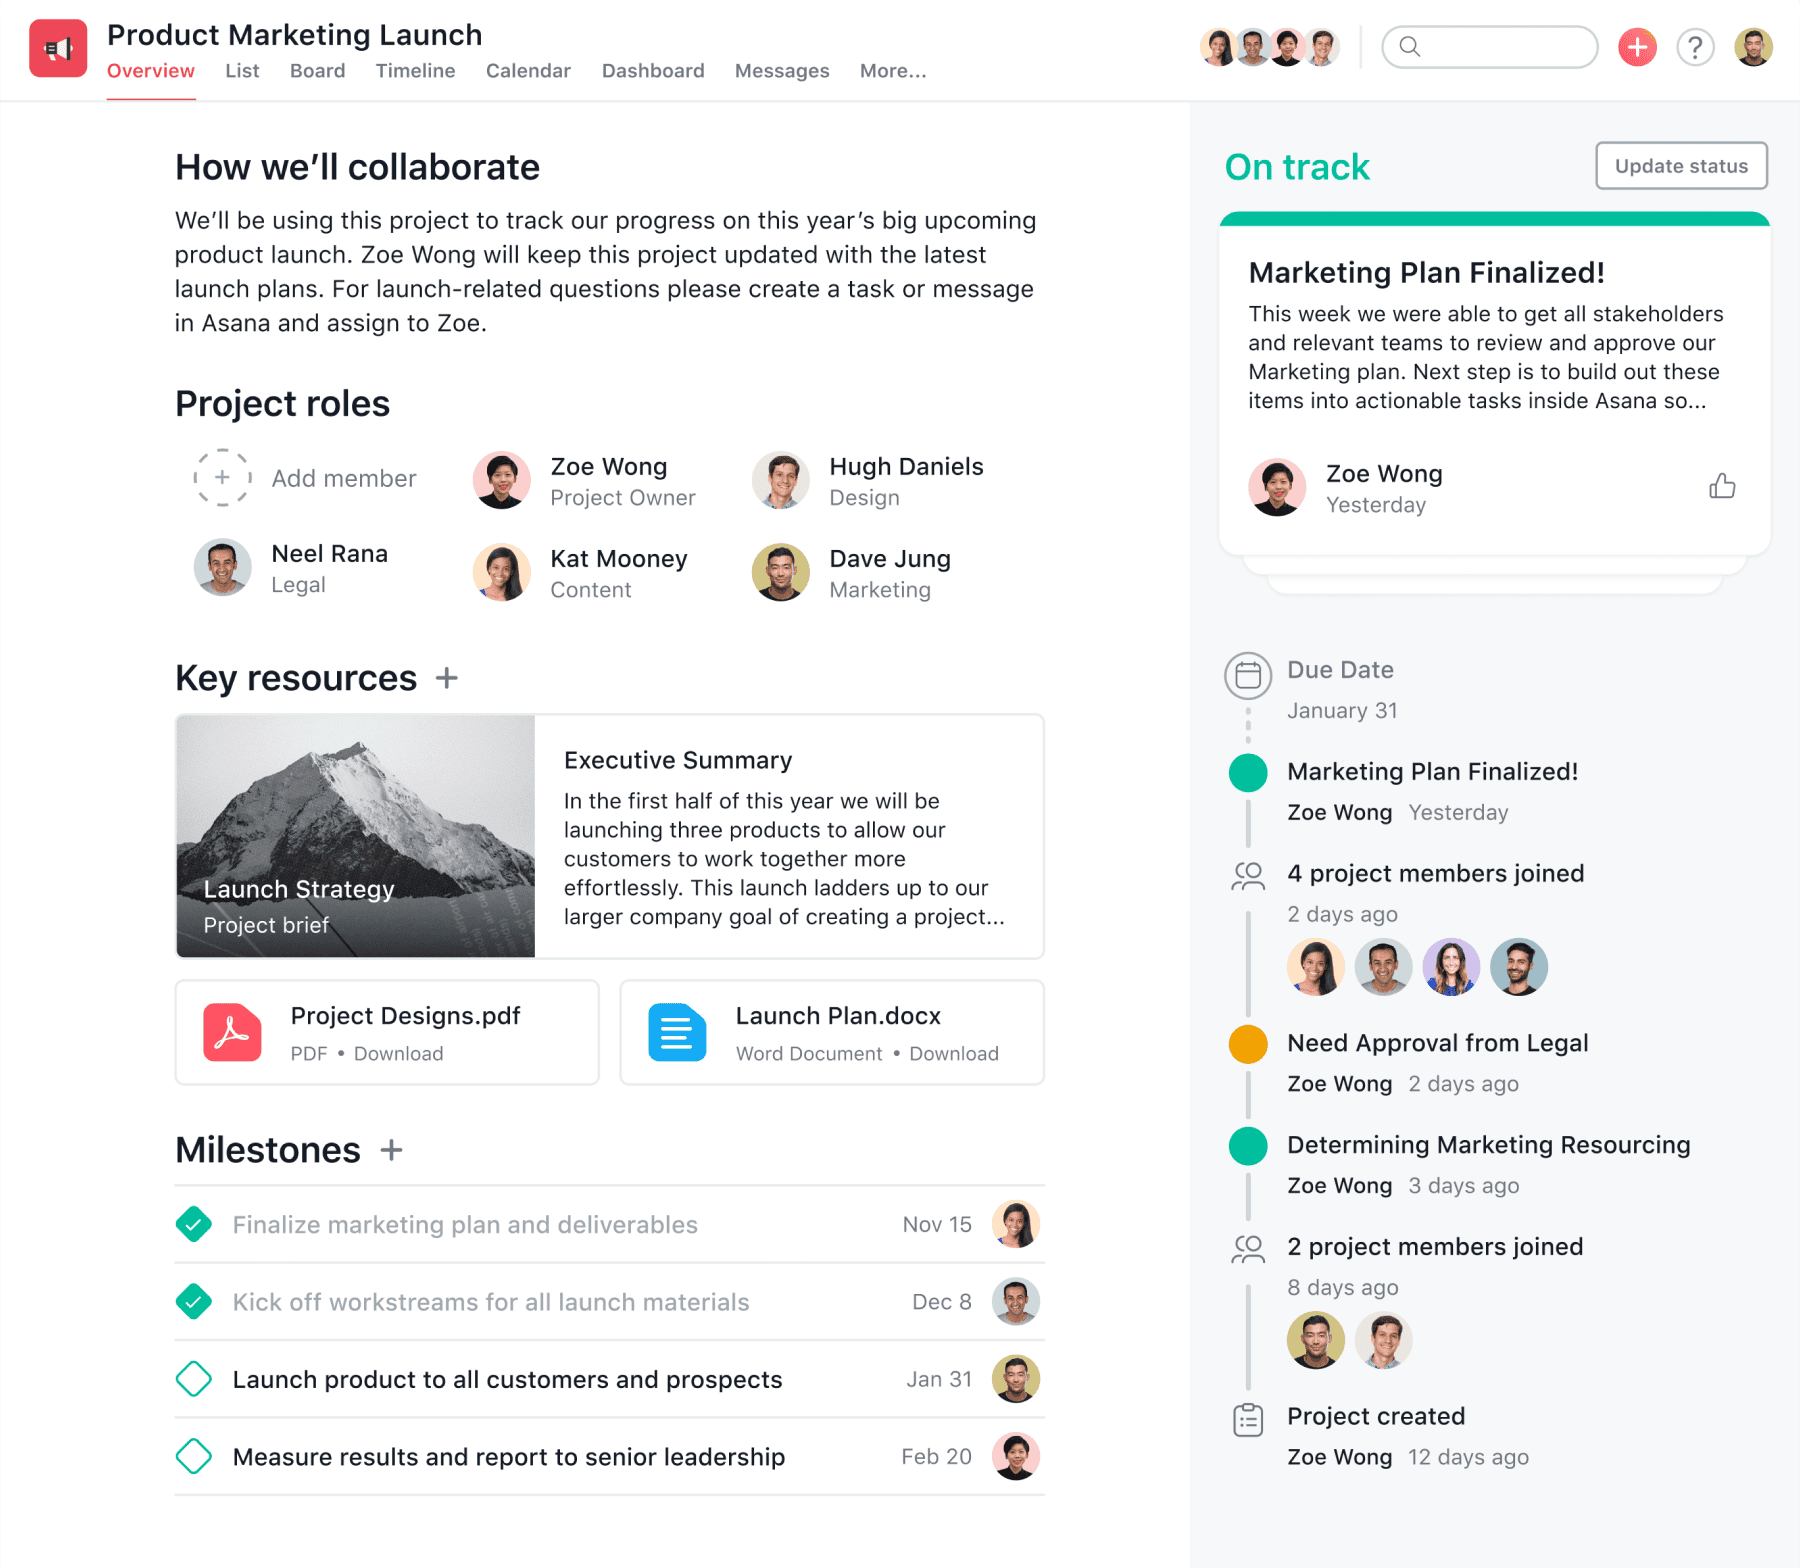 [Product UI] Example Asana Project Overview for a product marketing launch project (Project Overview)